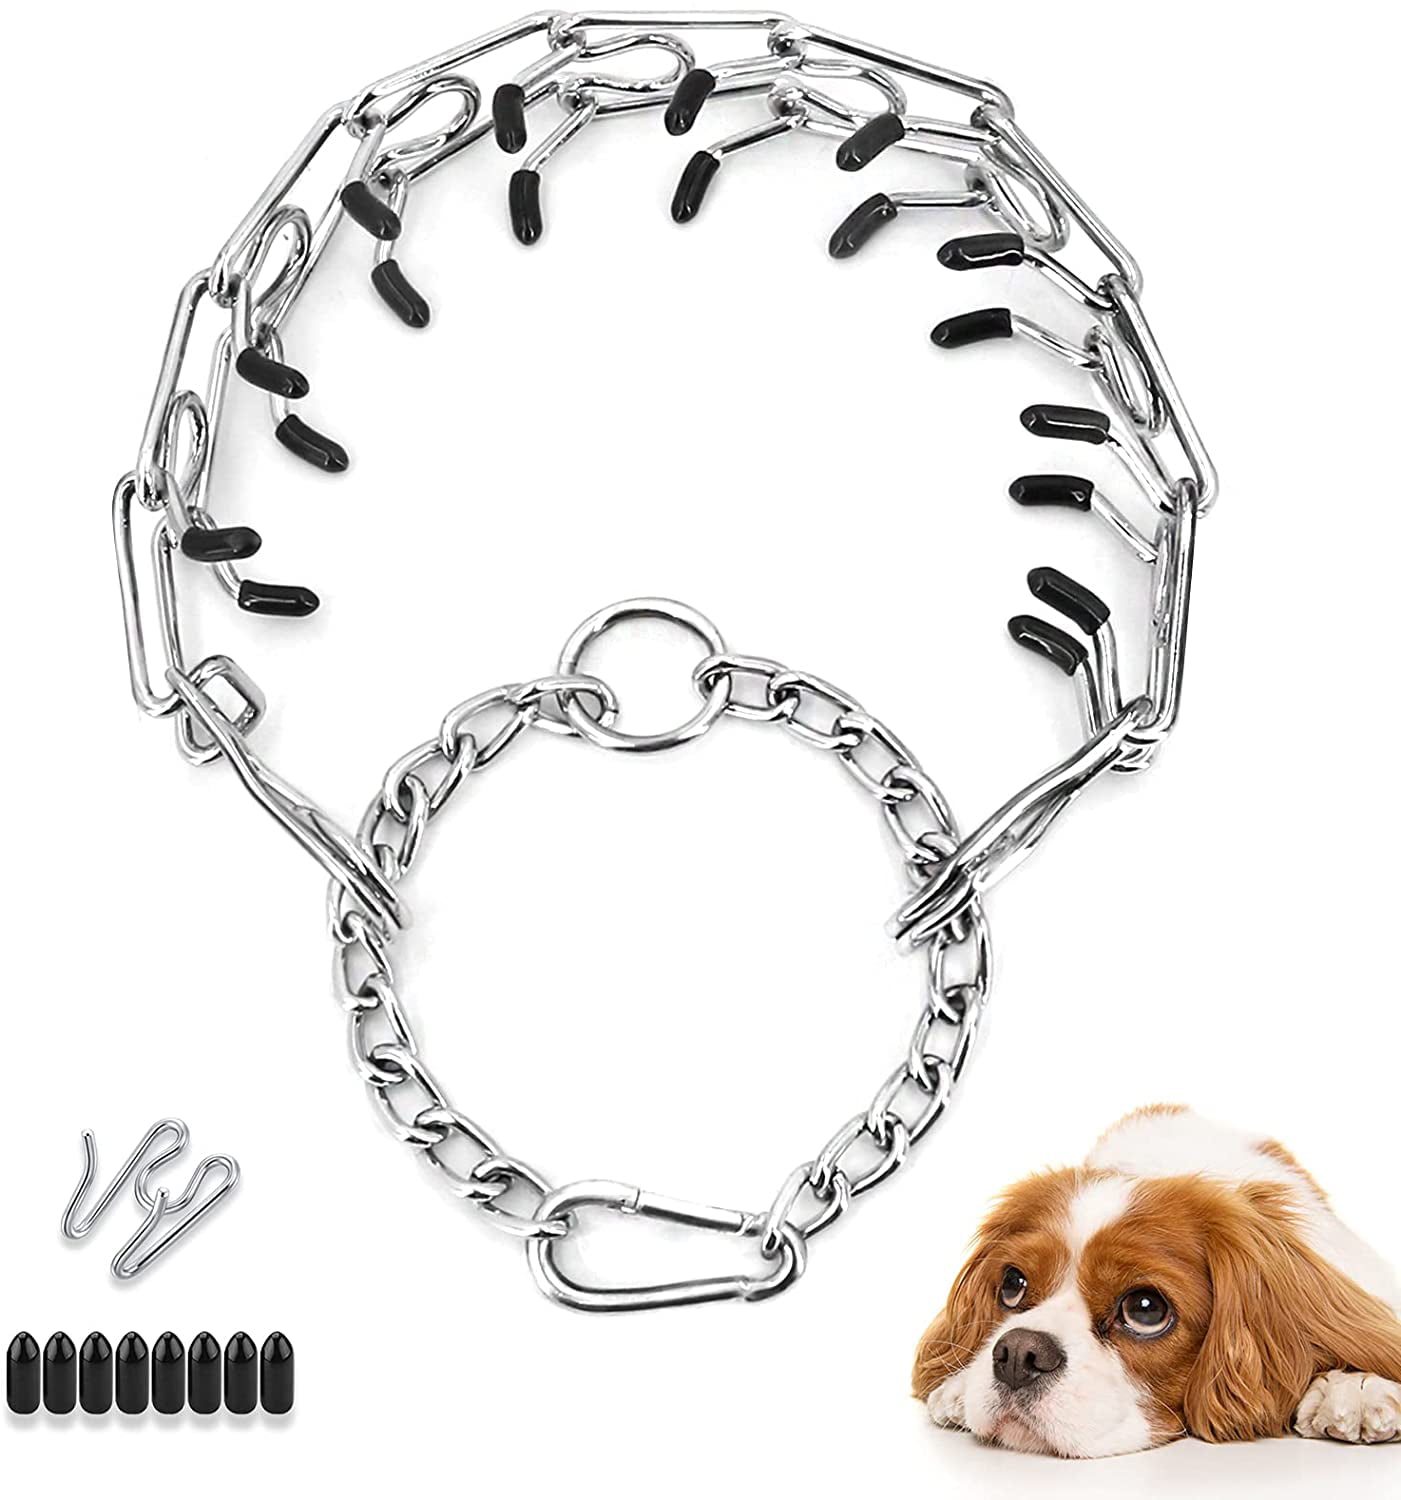 PATPET Dog Prong Training Collar,Dog Choke Pinch Collar with Rubber Tips for Small Medium Large Dogs 